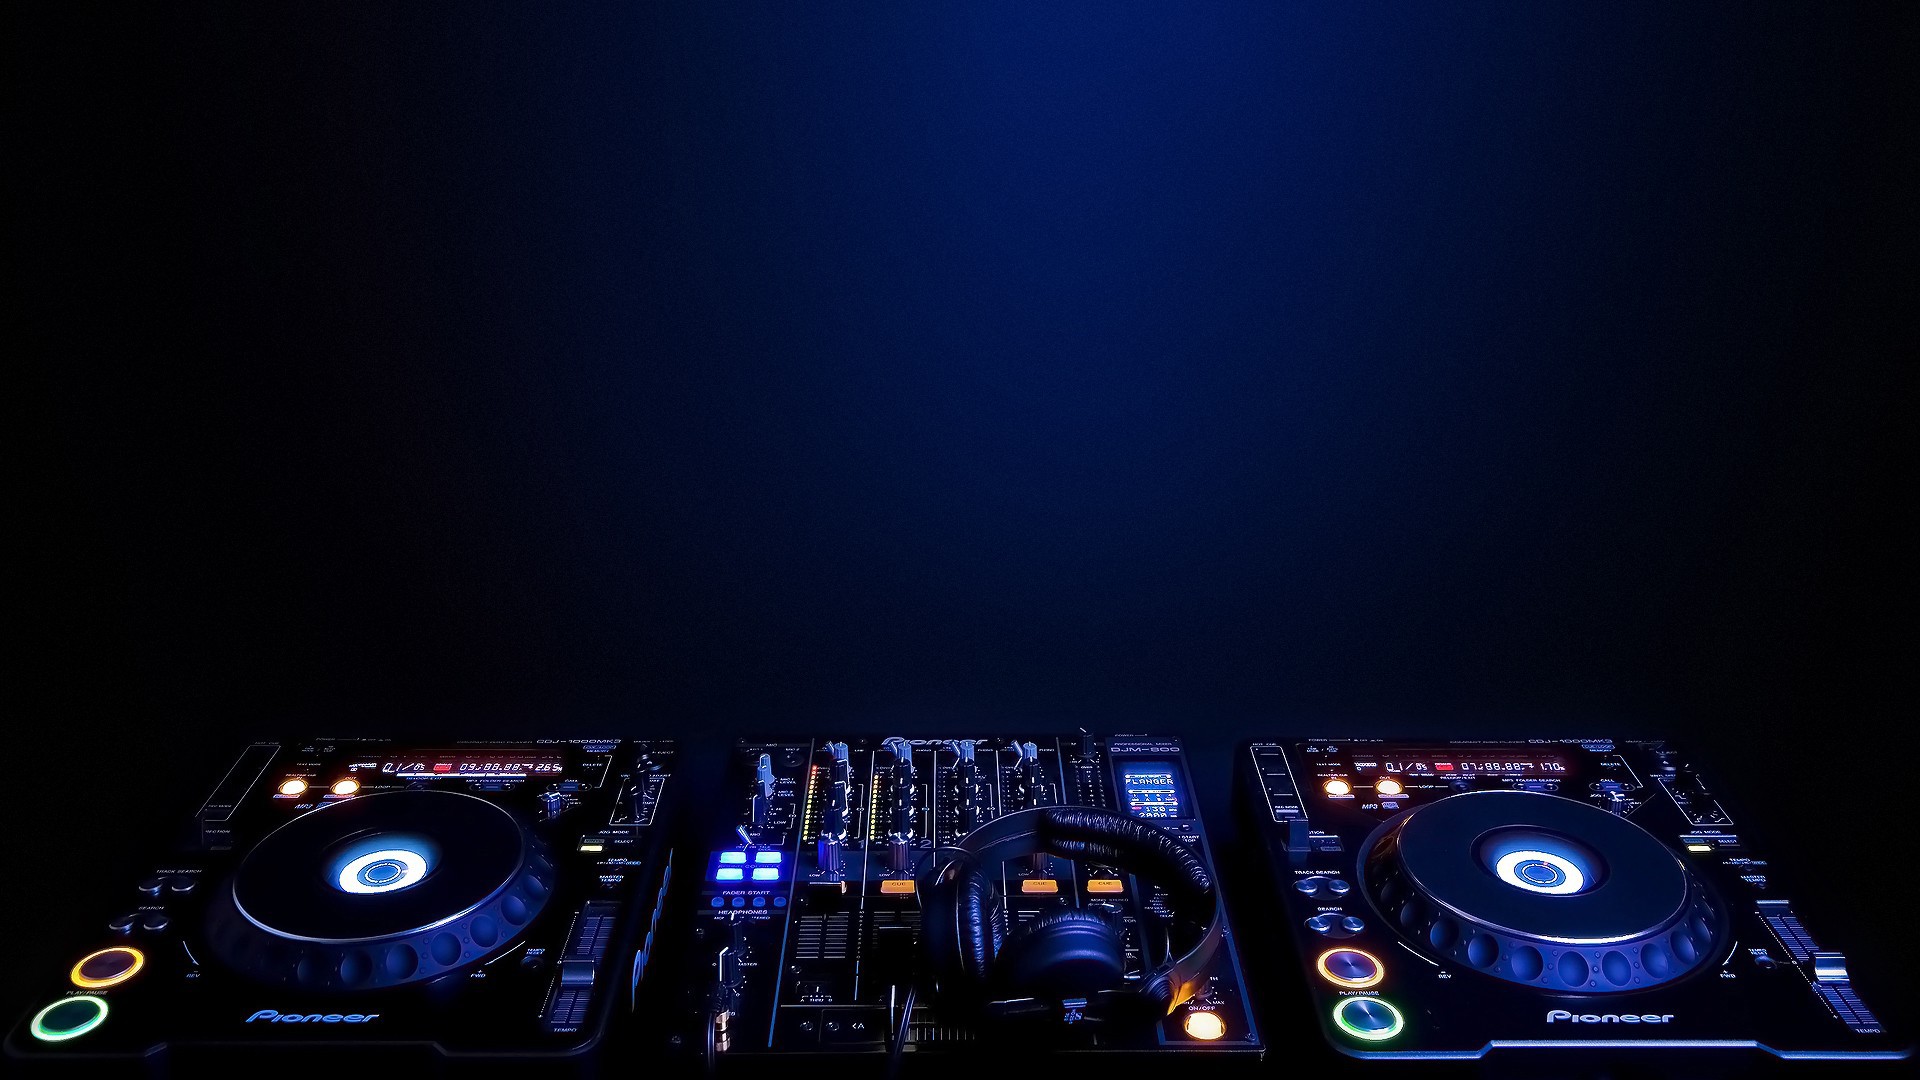 Neon DJ booth wallpapers and images - wallpapers, pictures ...
 Neon Dj Booth